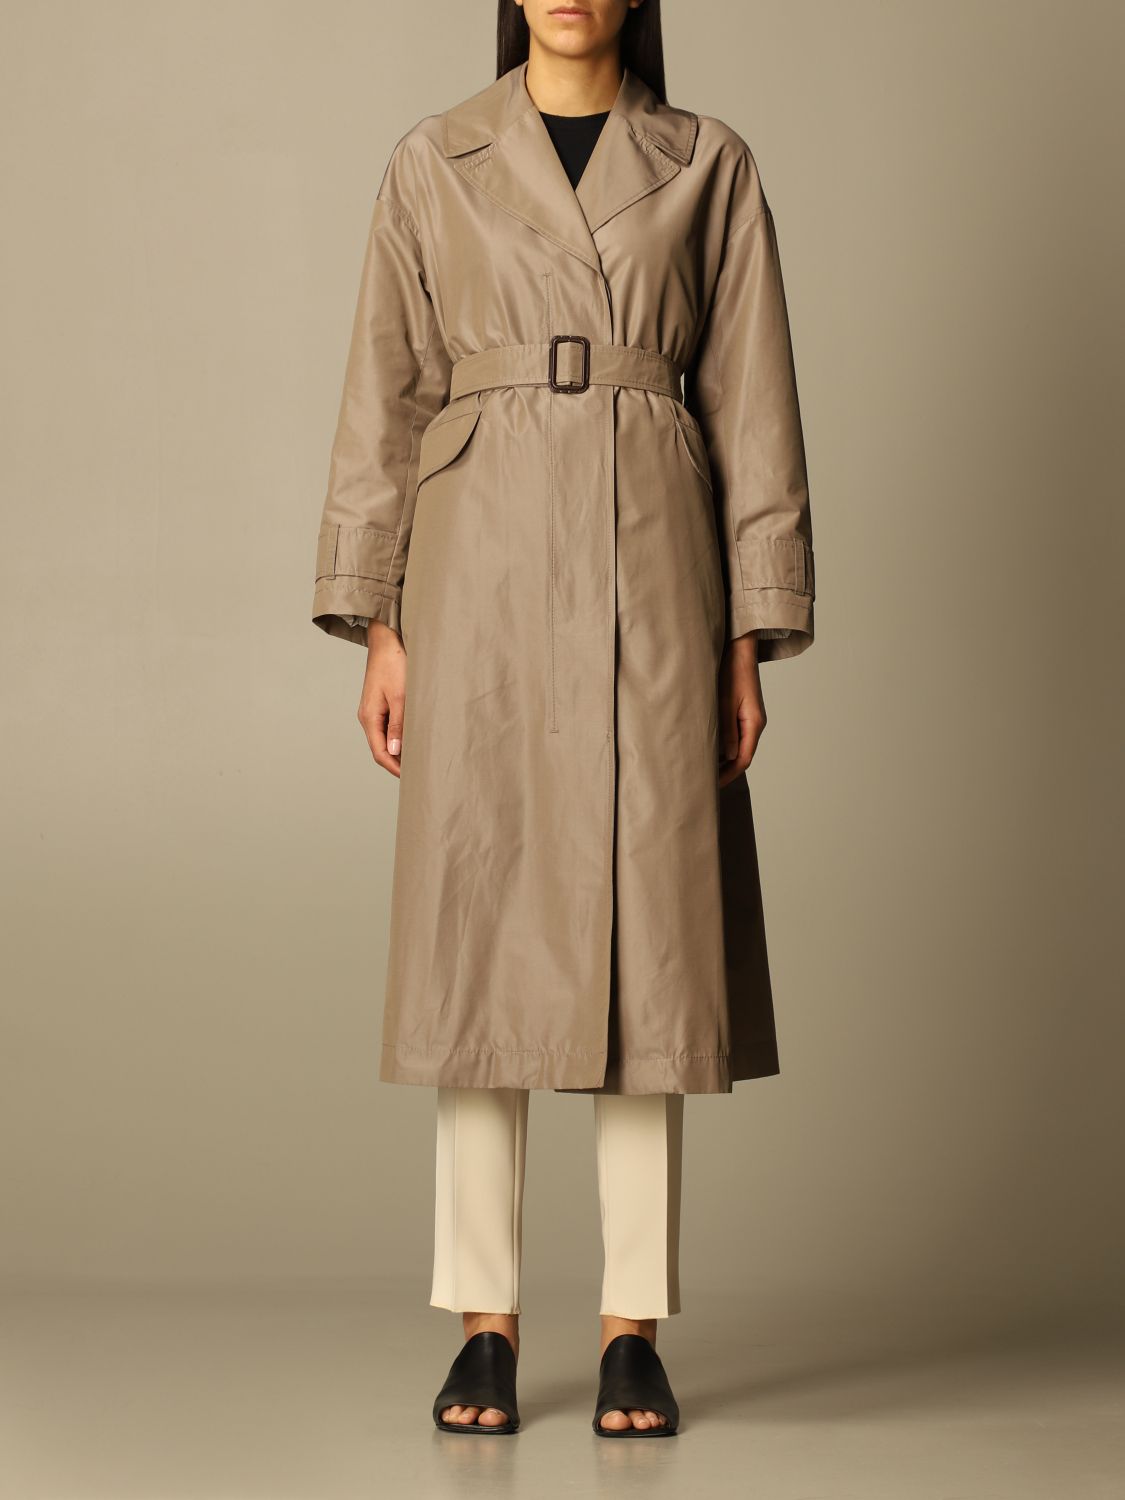 Max Mara The Cube Outlet: Eimper trench coat in cotton blend - Brown | Max  Mara The Cube trench coat 90210717600 online on GIGLIO.COM